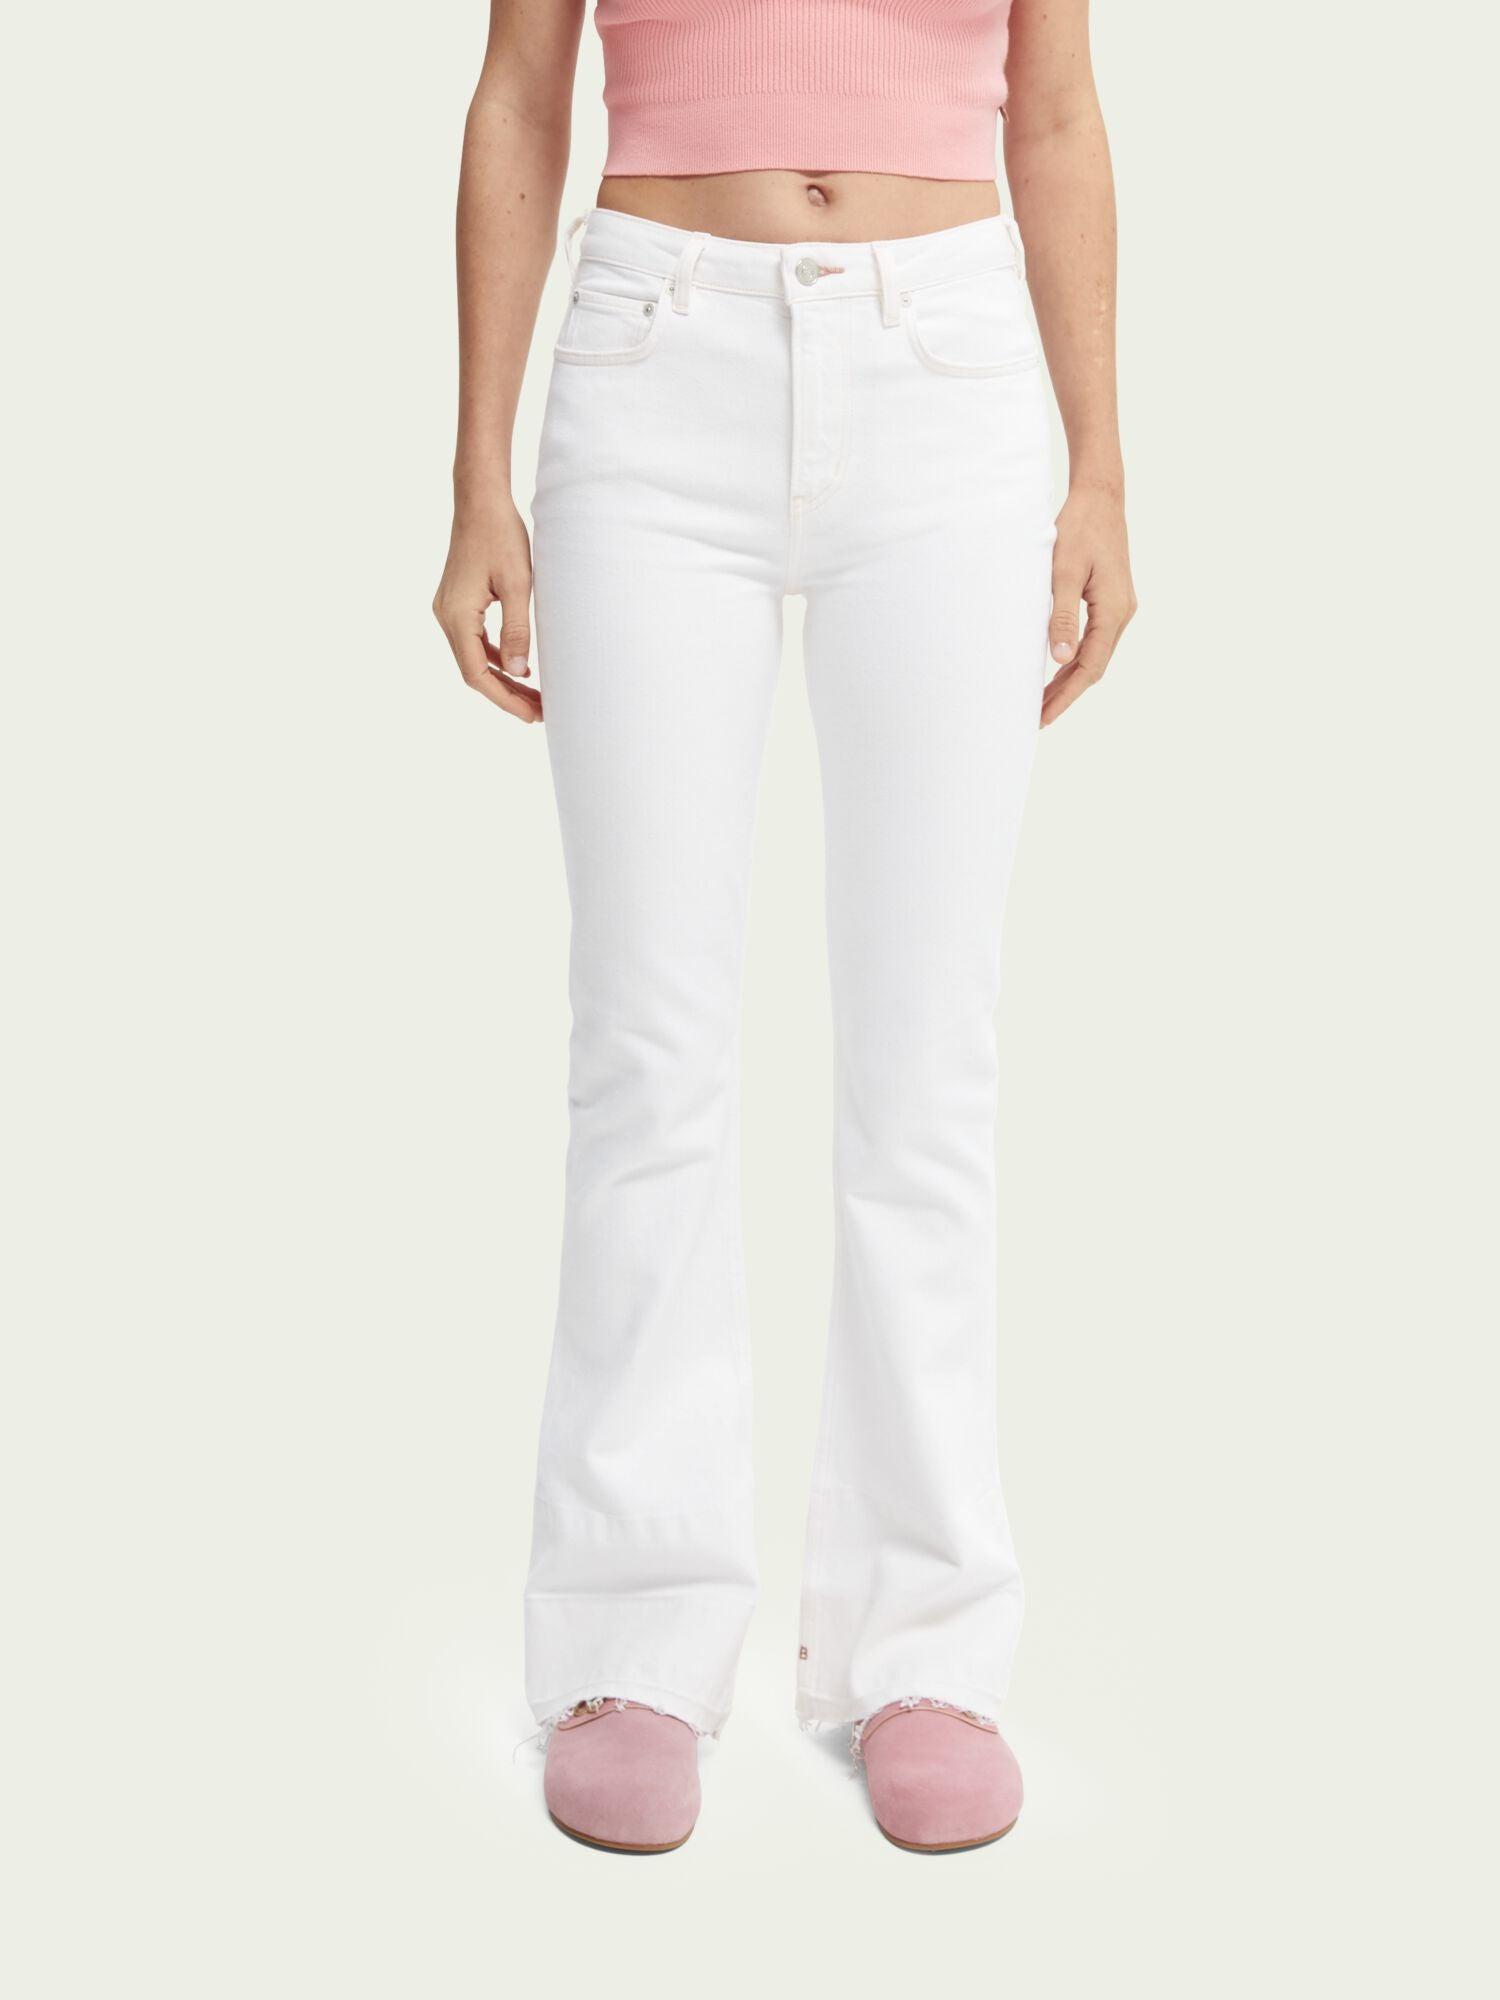 Scotch & Soda The Charm Flared Organic Cotton Jeans in White | Lyst